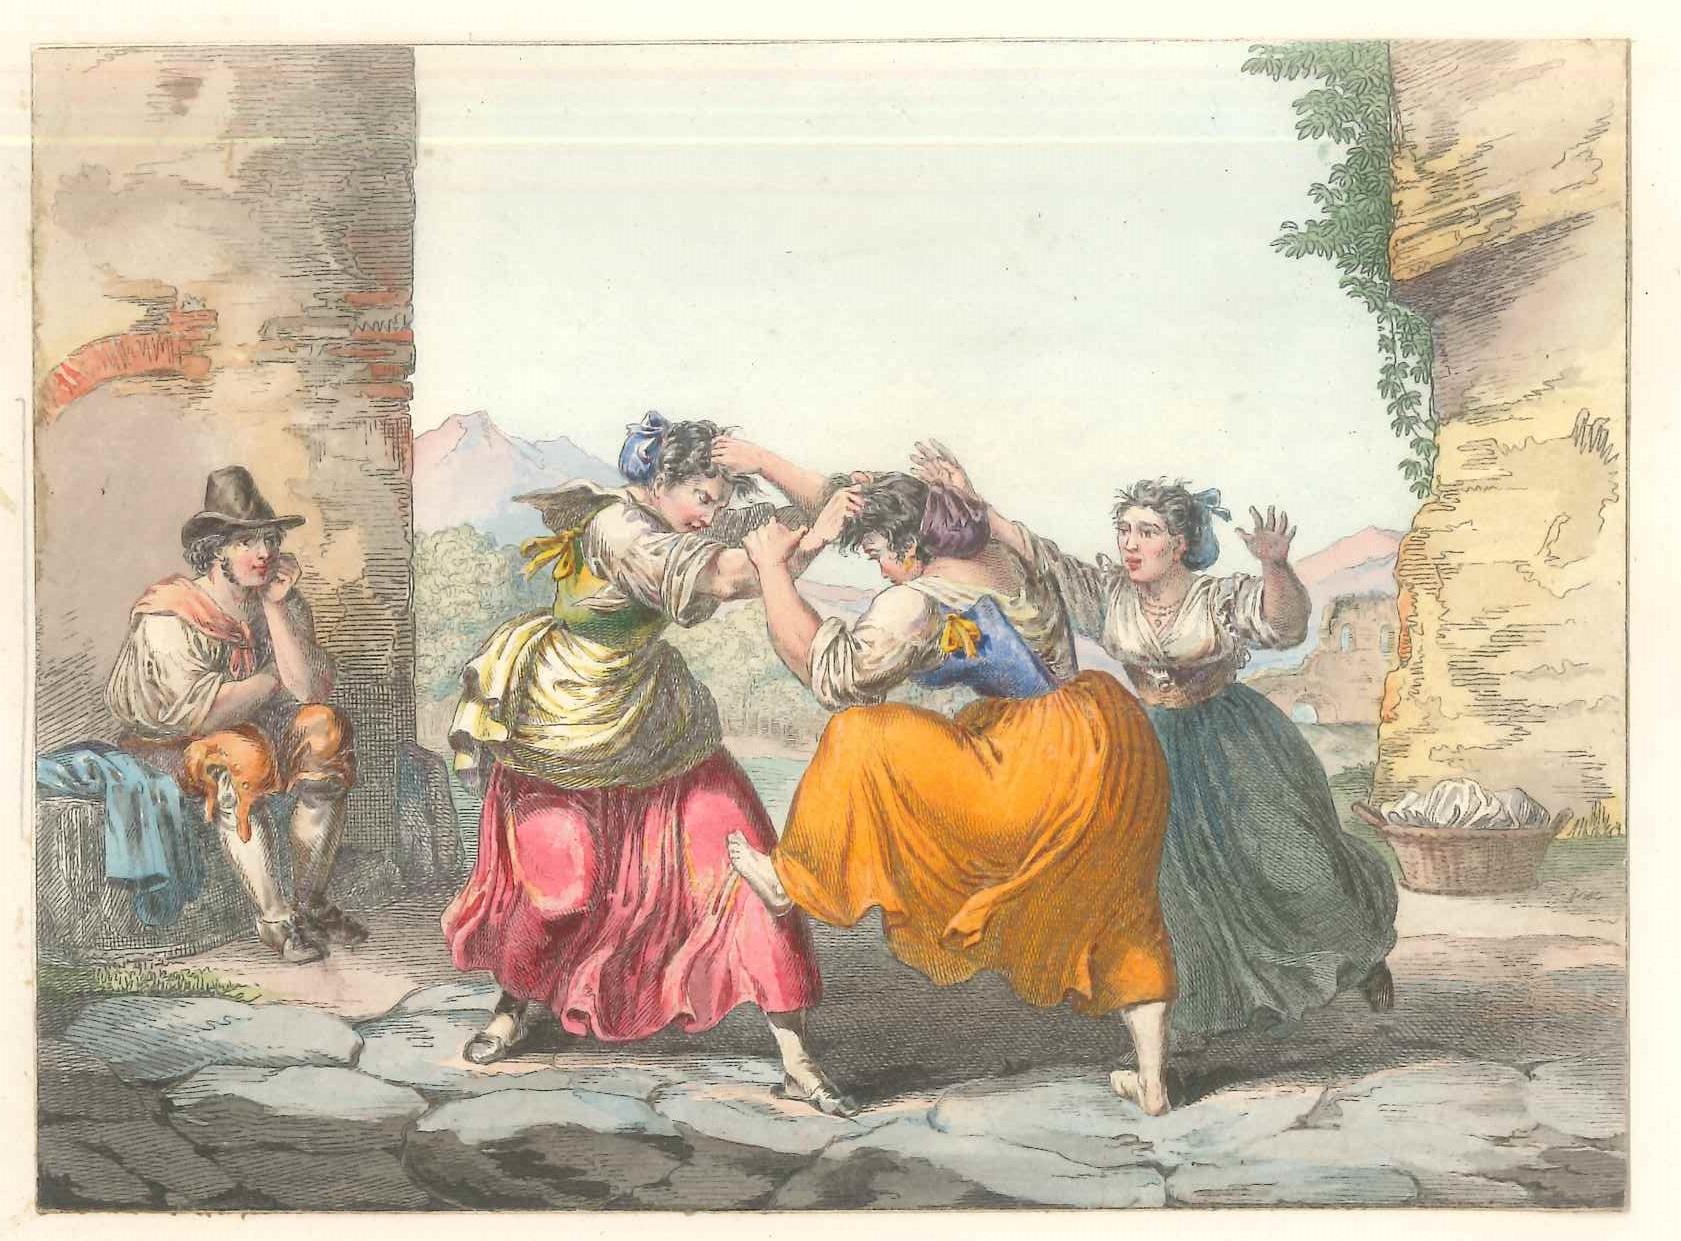 Genre Scenes / Rome 1800 - Lithographs and Watercolors - Mid 19th Century - Print by Unknown